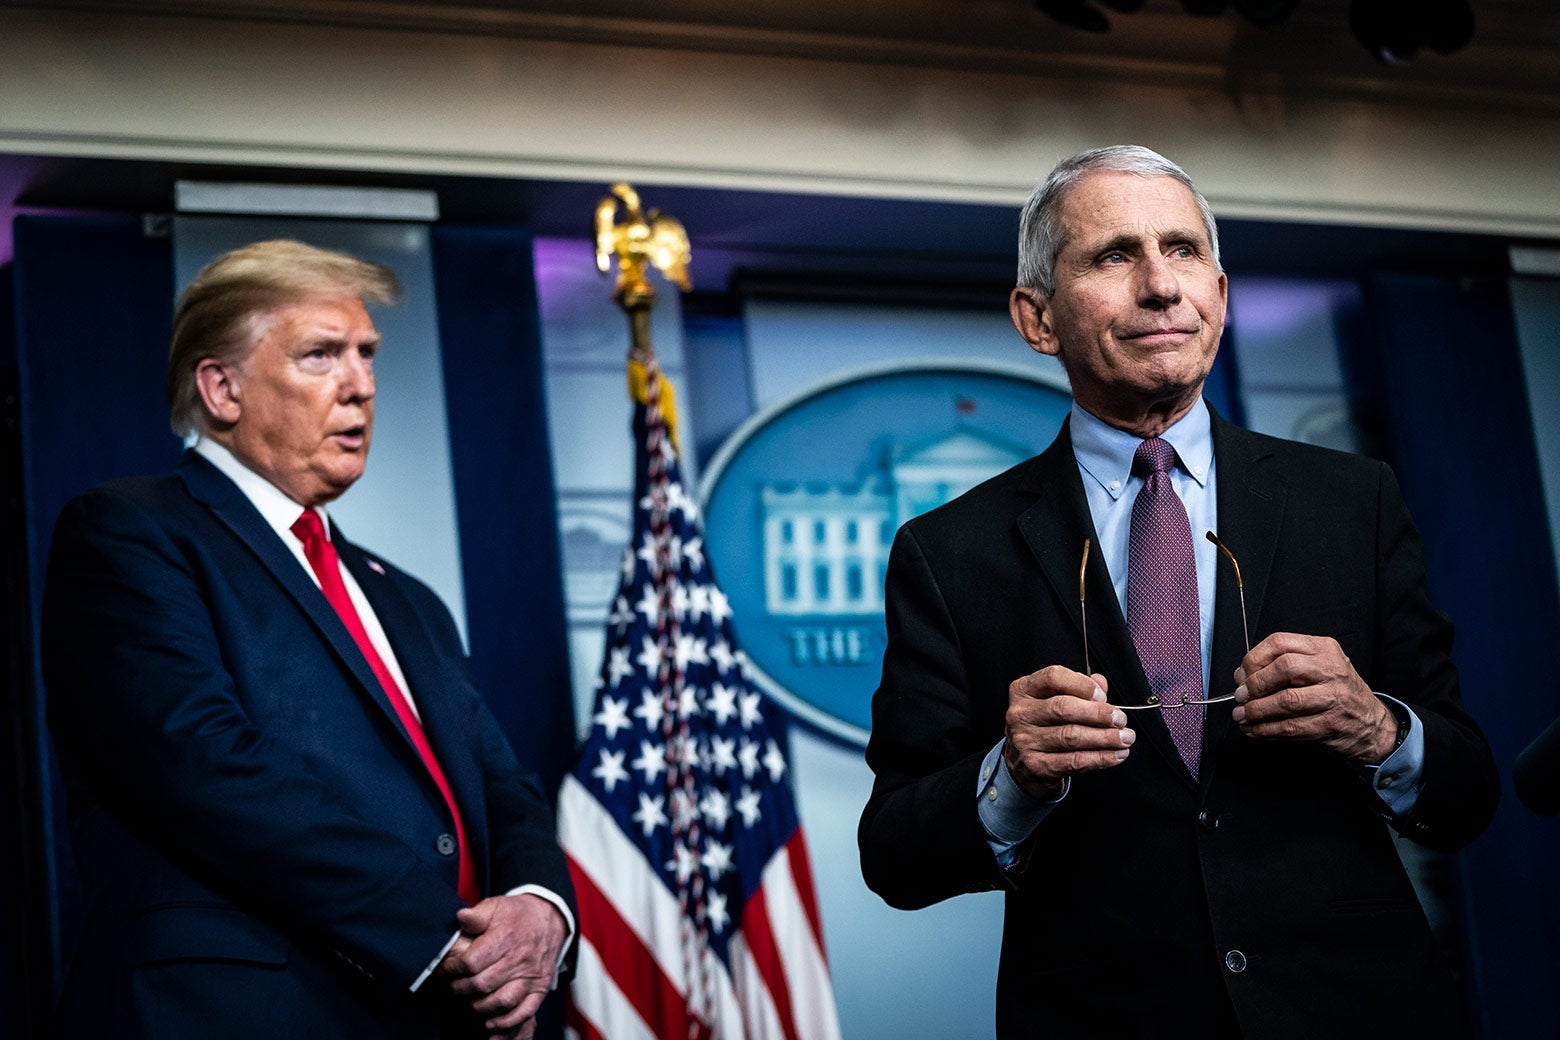 Trump stands back and to the side as Fauci stands forward holding his glasses.